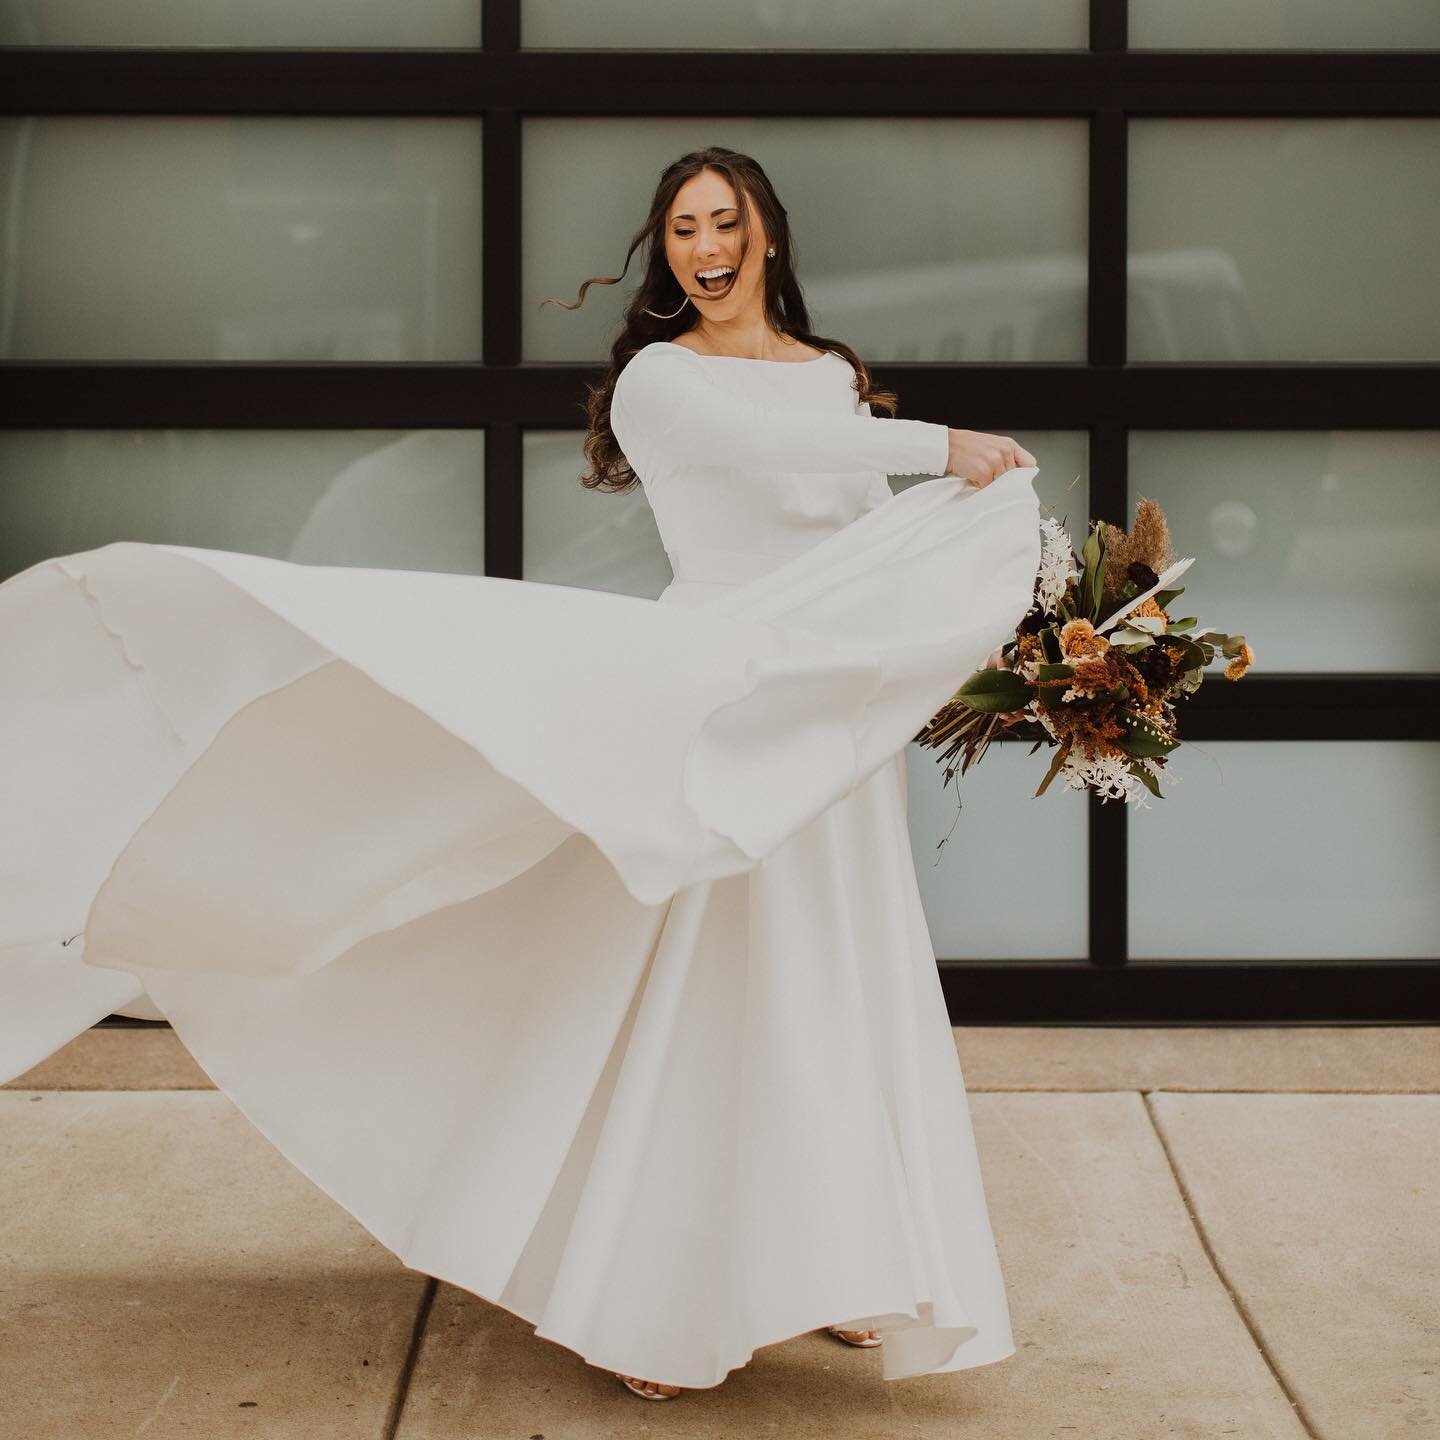 I first met Makayla through mutual friends and she&rsquo;s the most kind, creative soul, not to mention stunning bride. She opted for mostly dried flowers for something a little bit off the beaten path, and it was so fun working together to pull it o